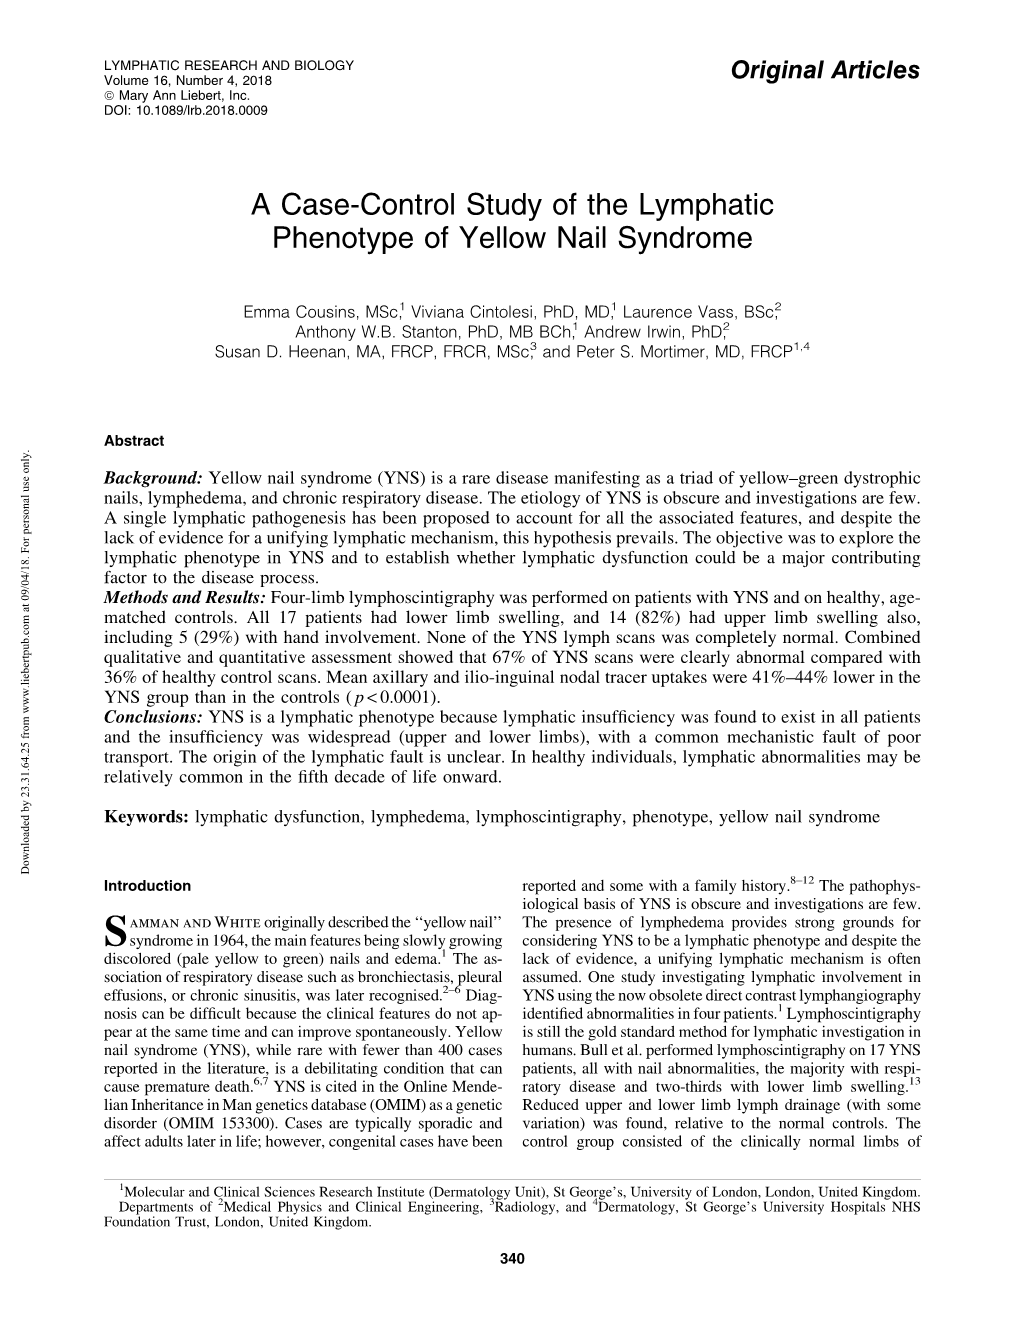 A Case-Control Study of the Lymphatic Phenotype of Yellow Nail Syndrome